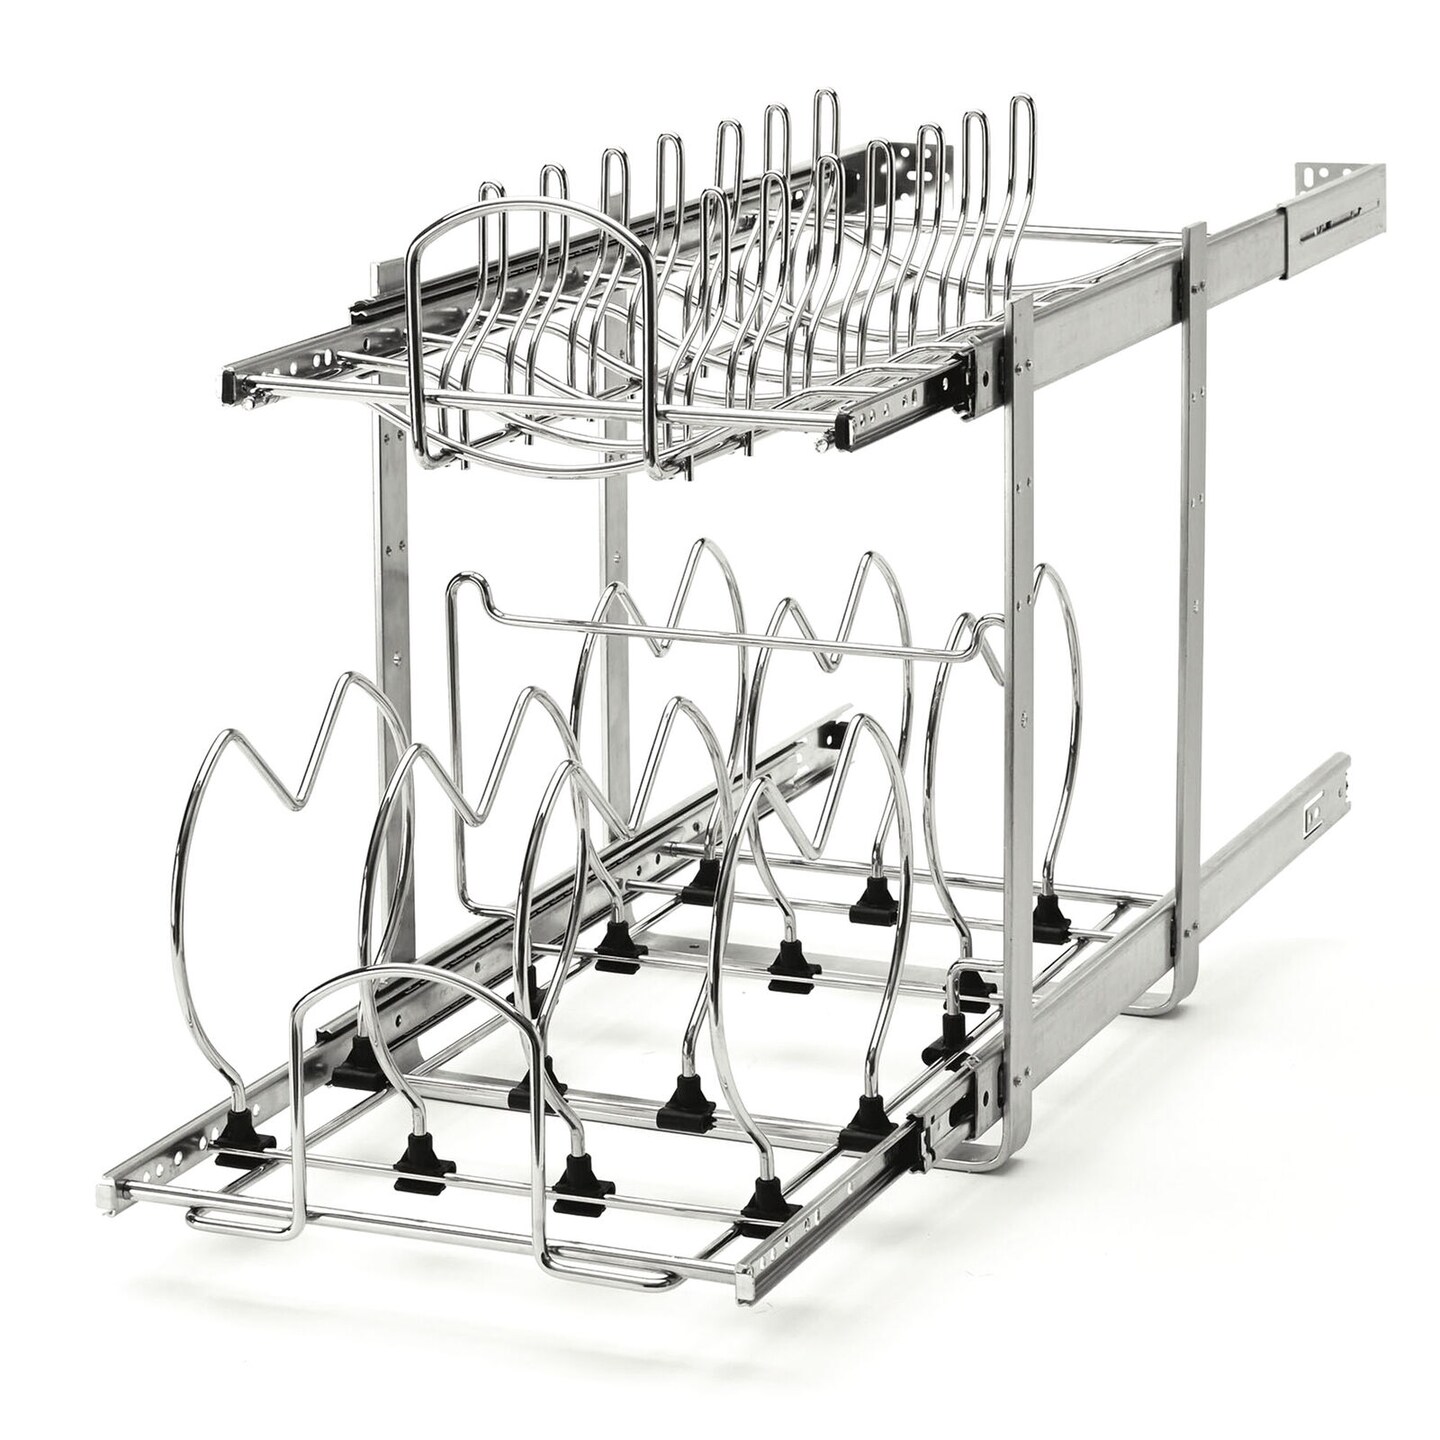 2-Tier Pull-Out Organizer for pots and pans